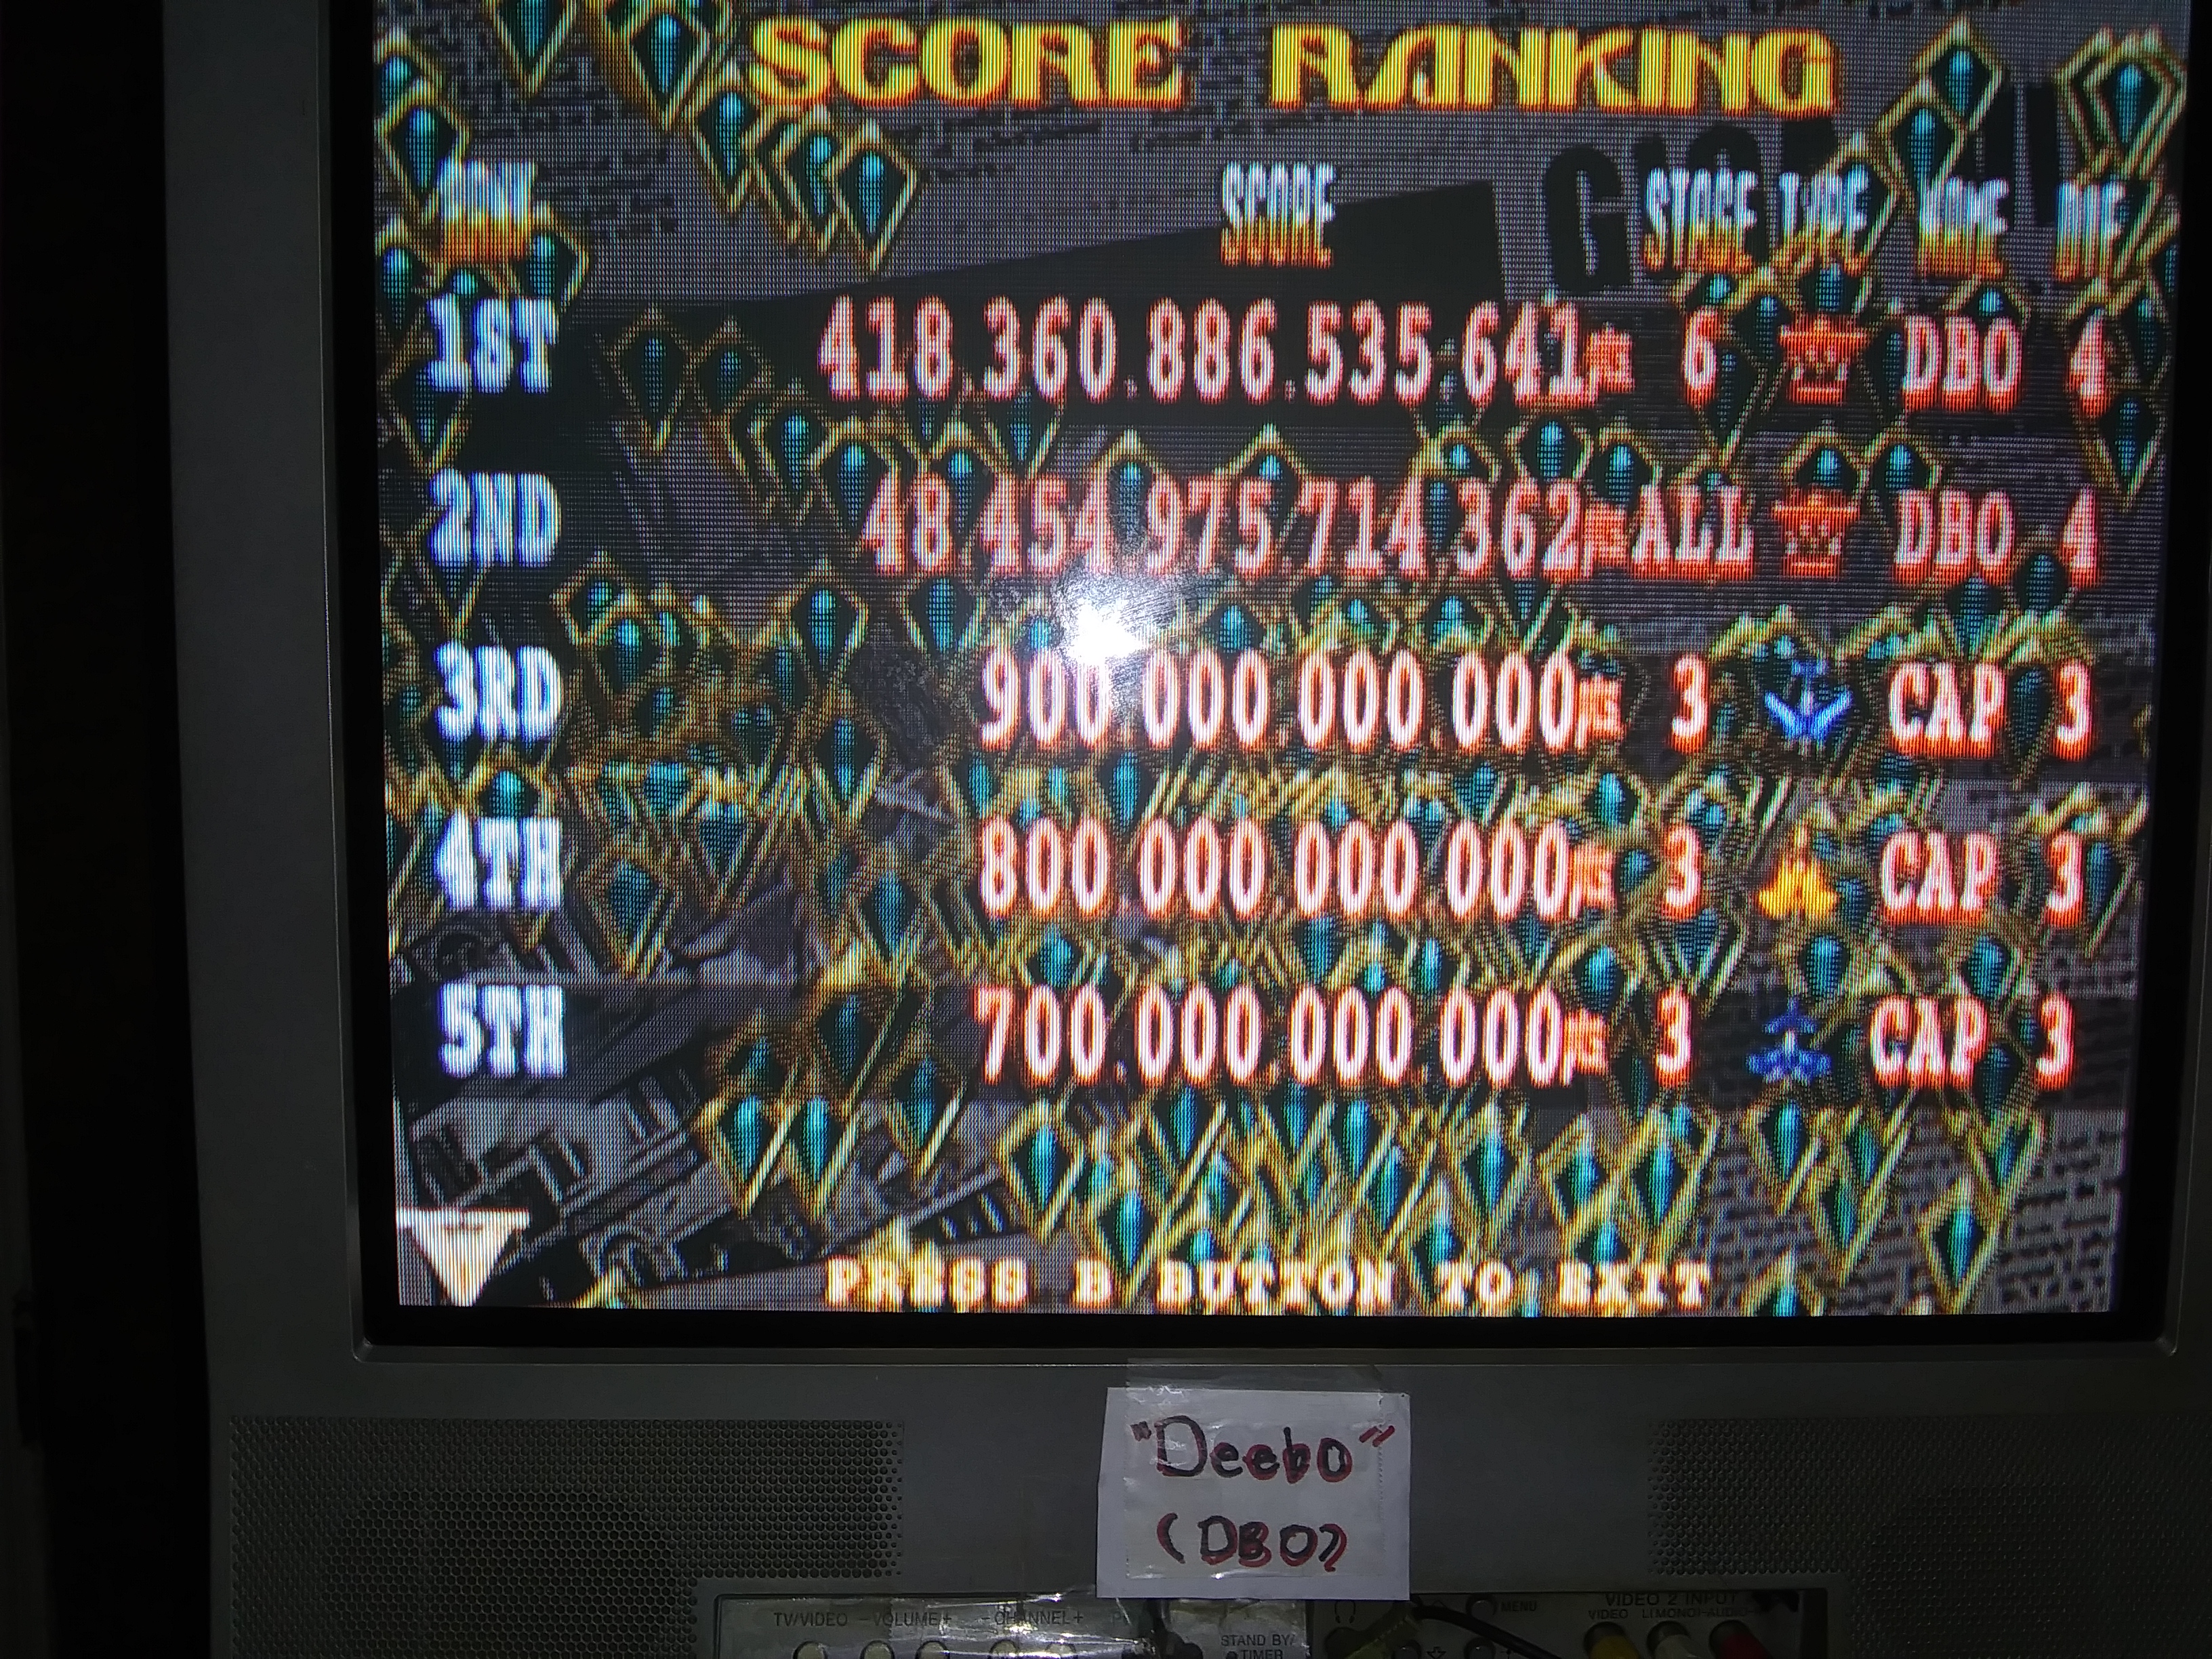 Deebo: Giga Wing 2 [Arcade Mode] (Dreamcast) 418,360,886,535,641 points on 2019-03-20 22:16:40